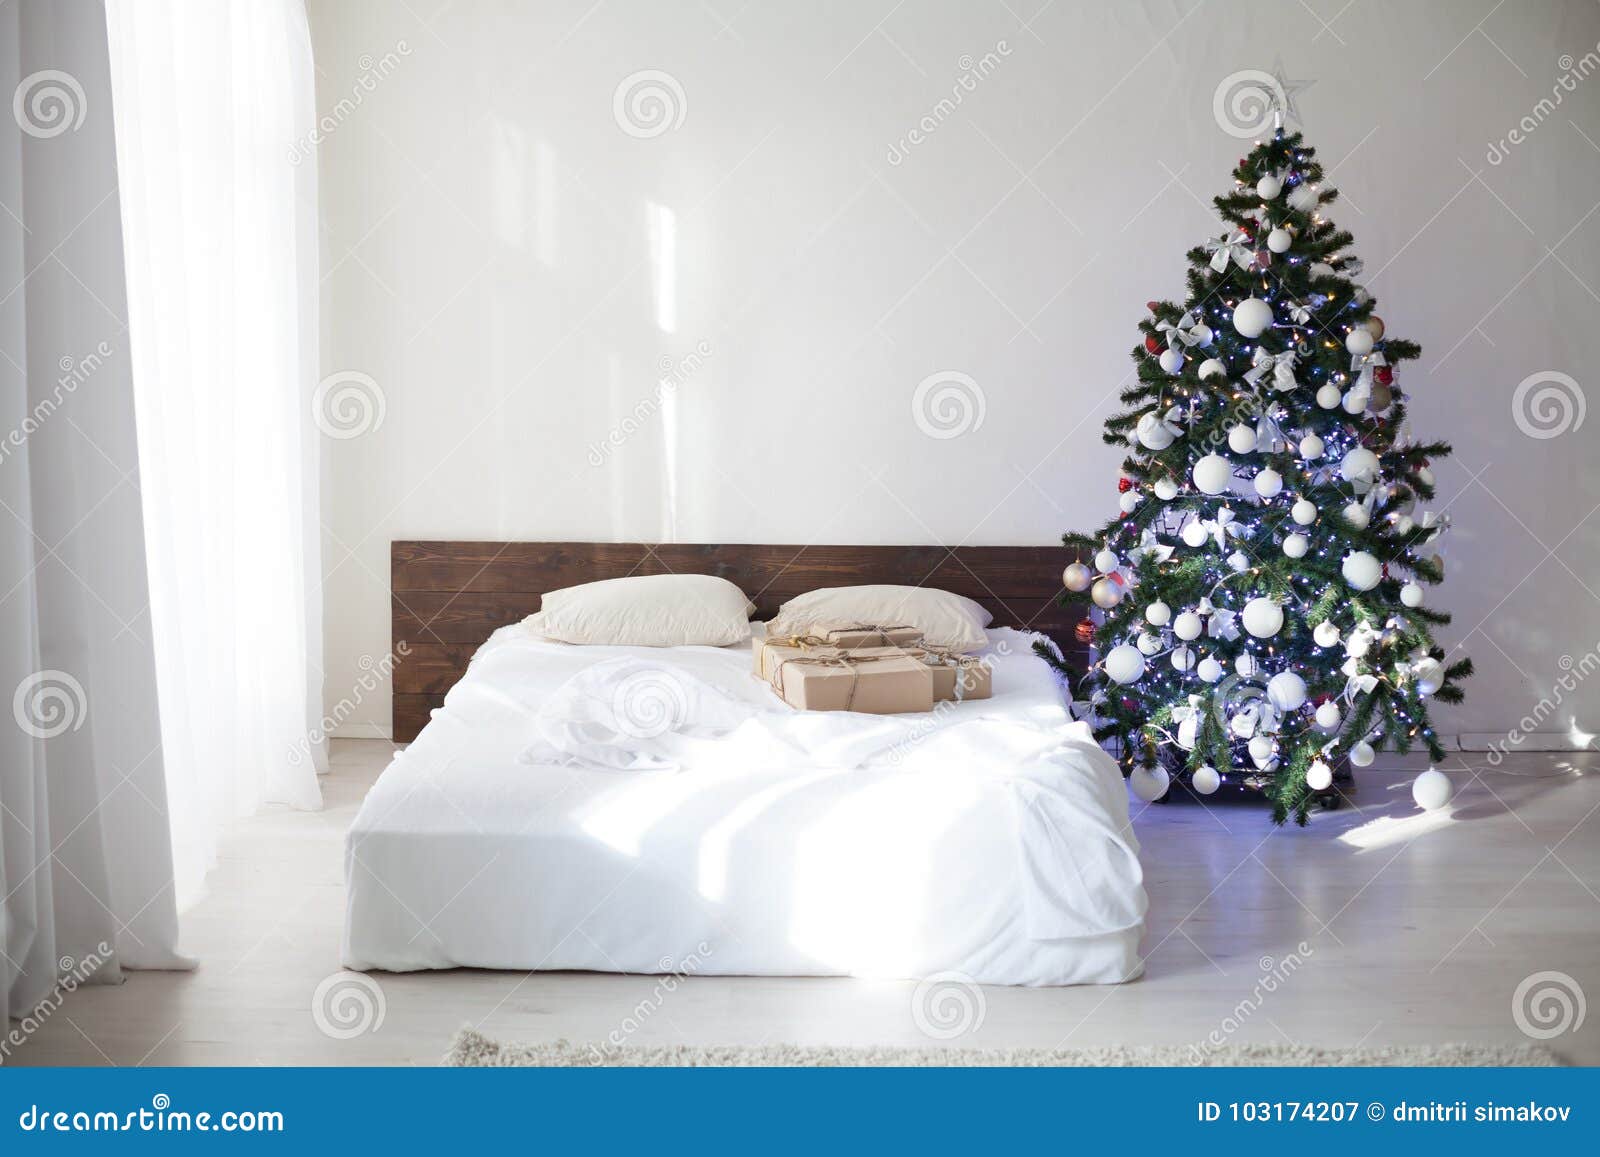 Bedroom with Christmas New Year Tree Decoration Bed Stock Image - Image ...